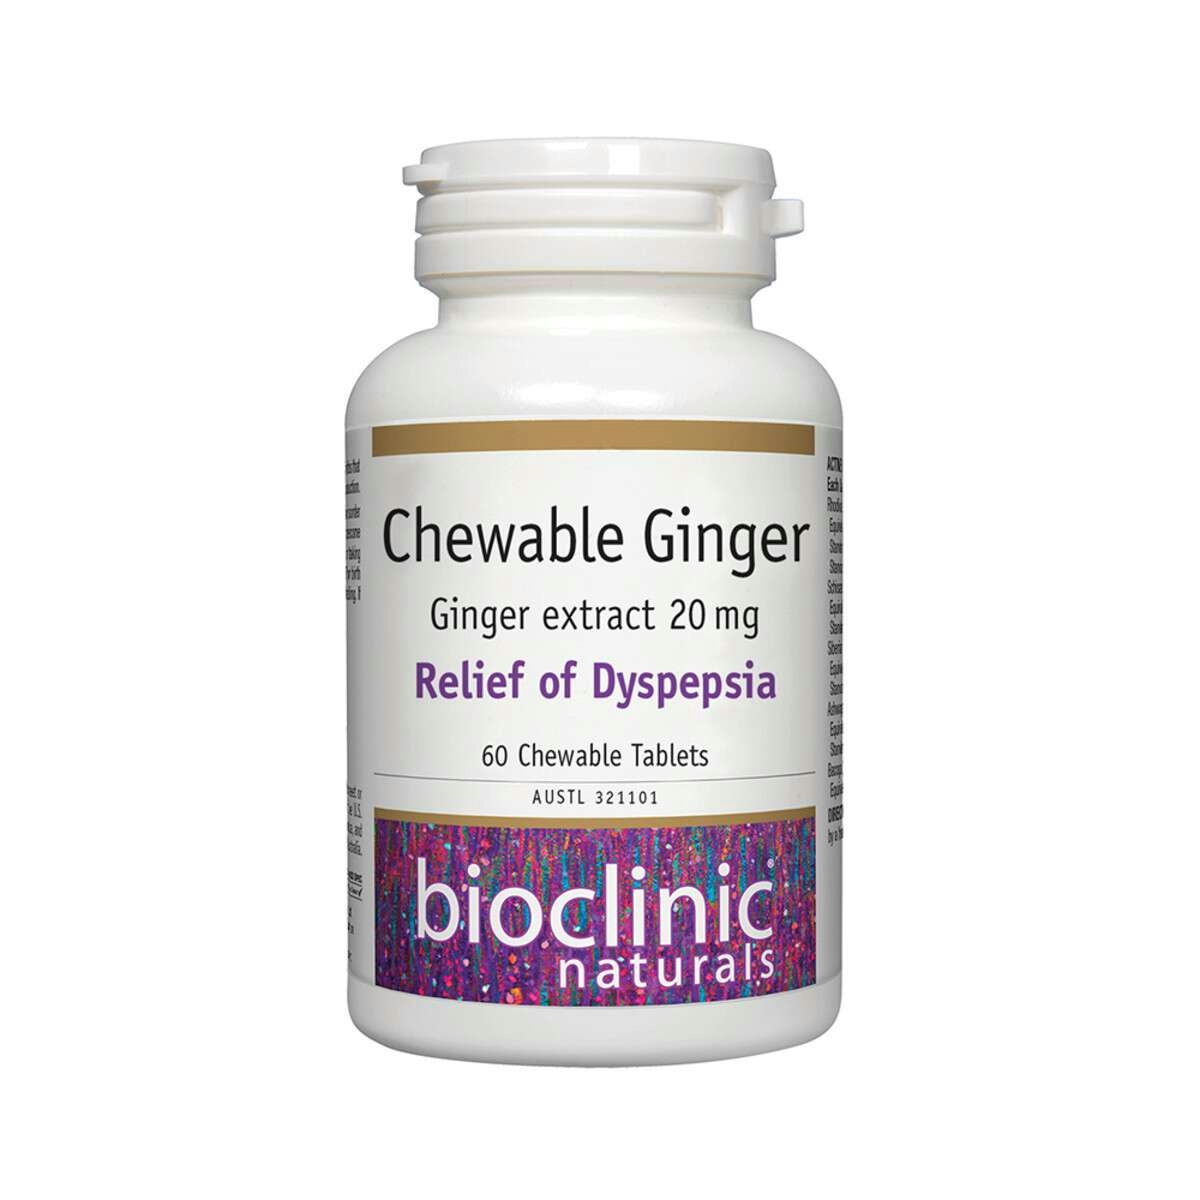 Image of Bioclinic Naturals Chewable Ginger 60t on white background